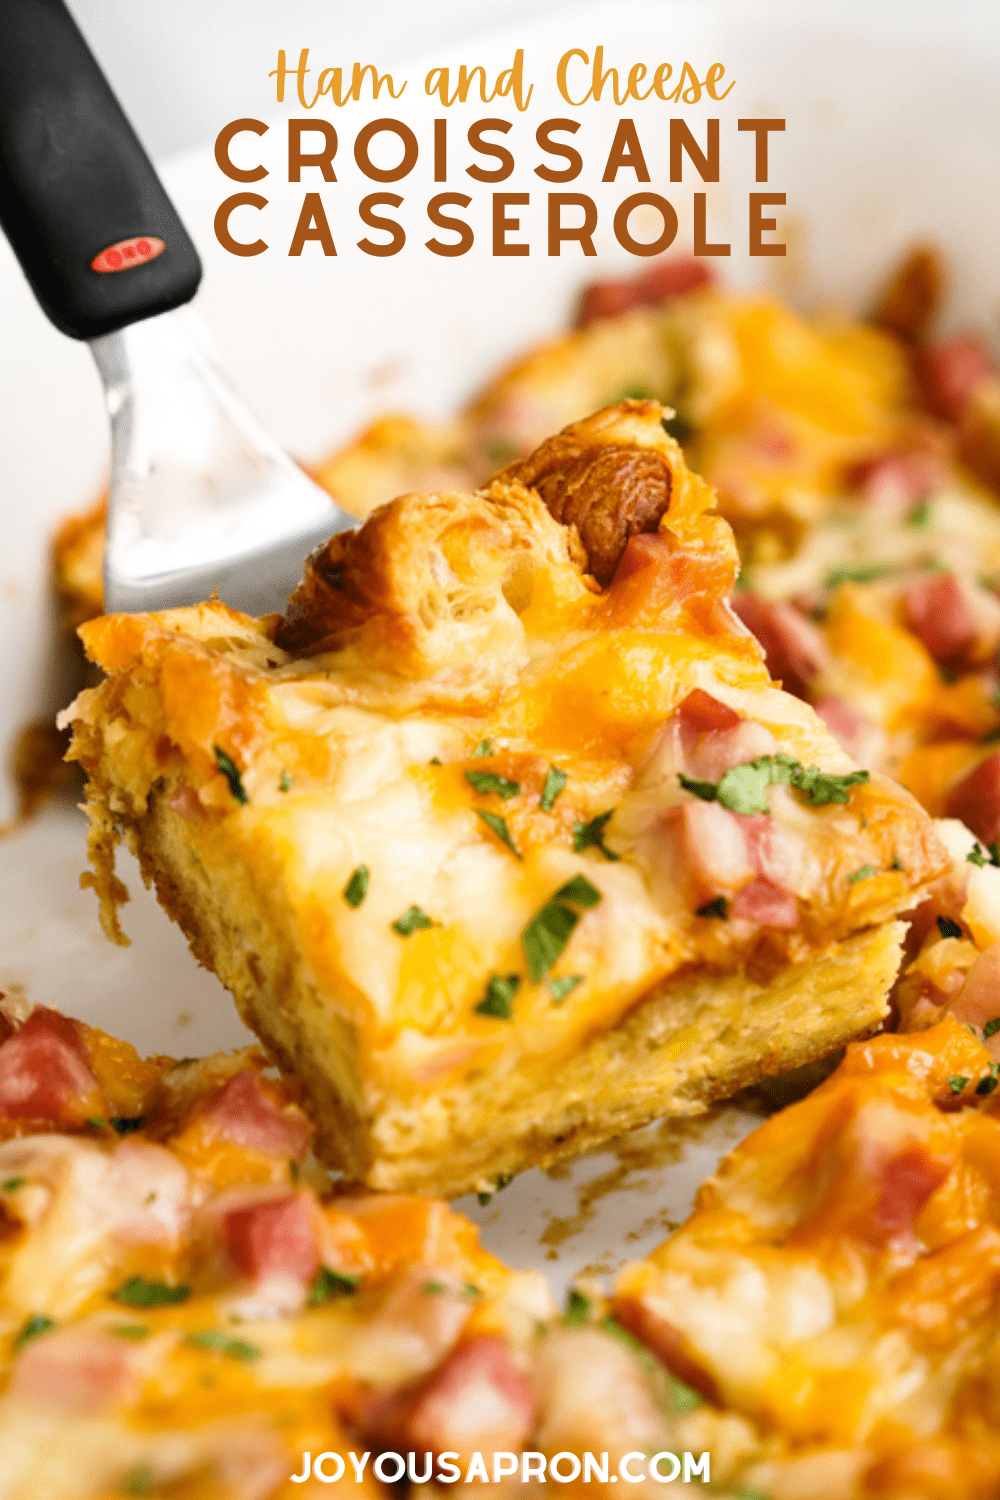 Ham and Cheese Breakfast Bake - a brunch casserole recipe! Soft on the inside and slightly crunchy on the outside, this casserole combines croissants, ham, spices with lots of cheesy goodness. Perfect use of leftover ham! via @joyousapron